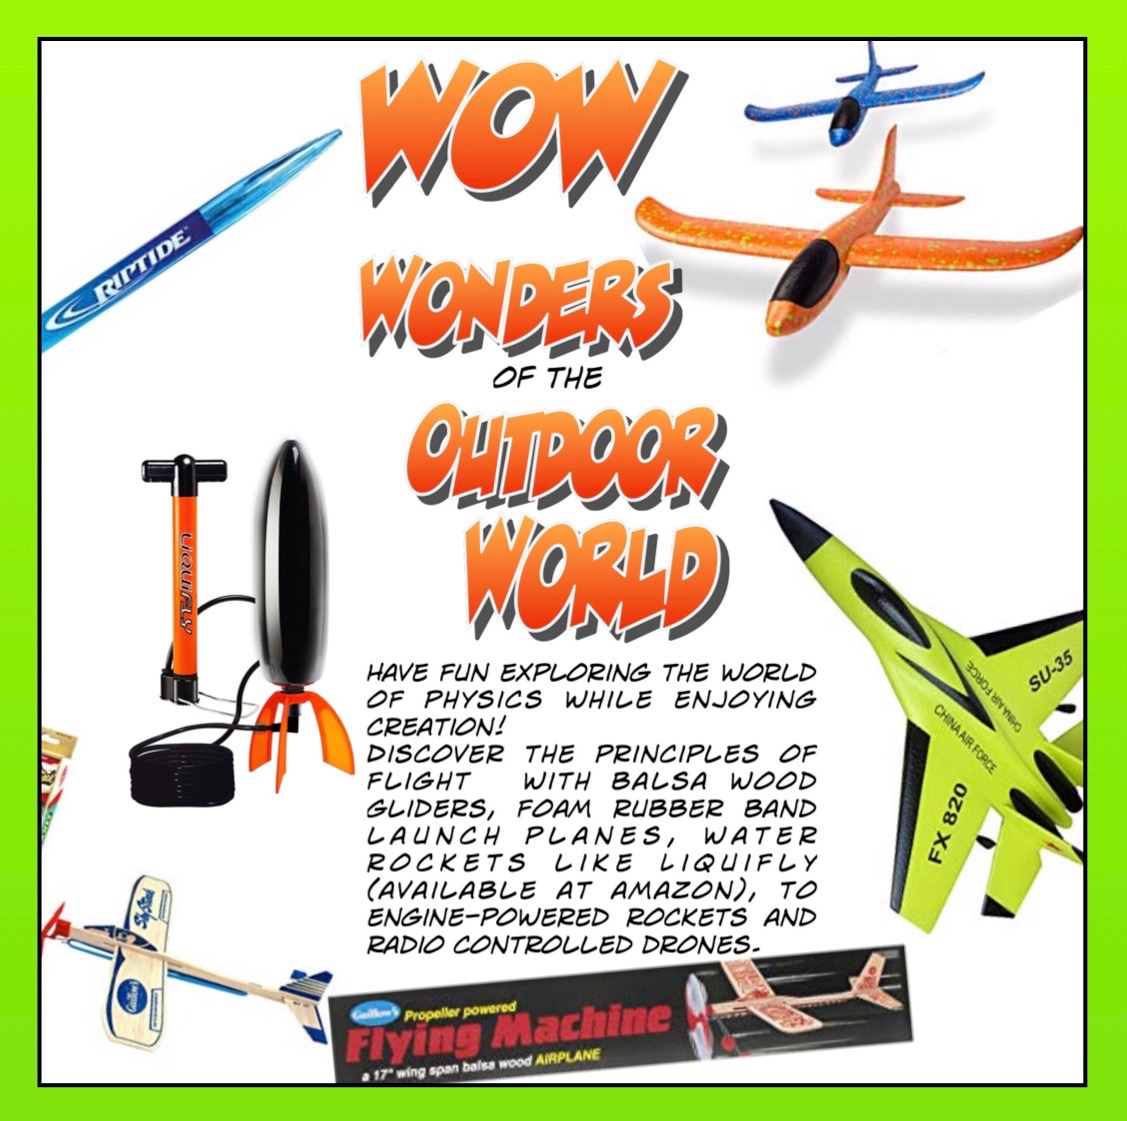 gliders and rockets